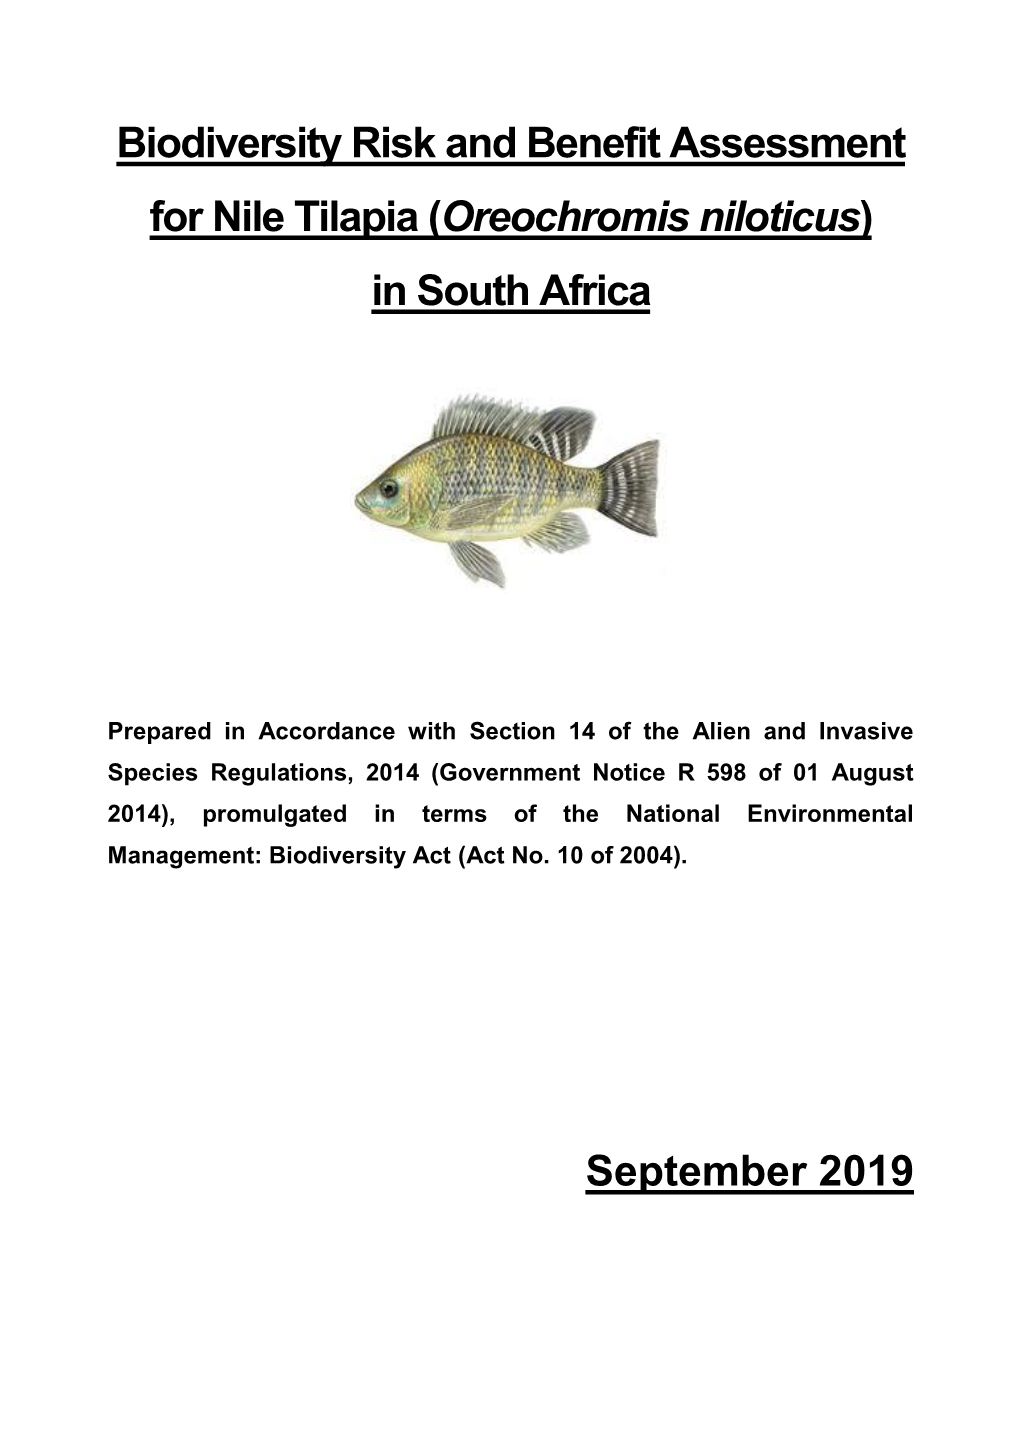 Biodiversity Risk and Benefit Assessment for Nile Tilapia (Oreochromis Niloticus) in South Africa